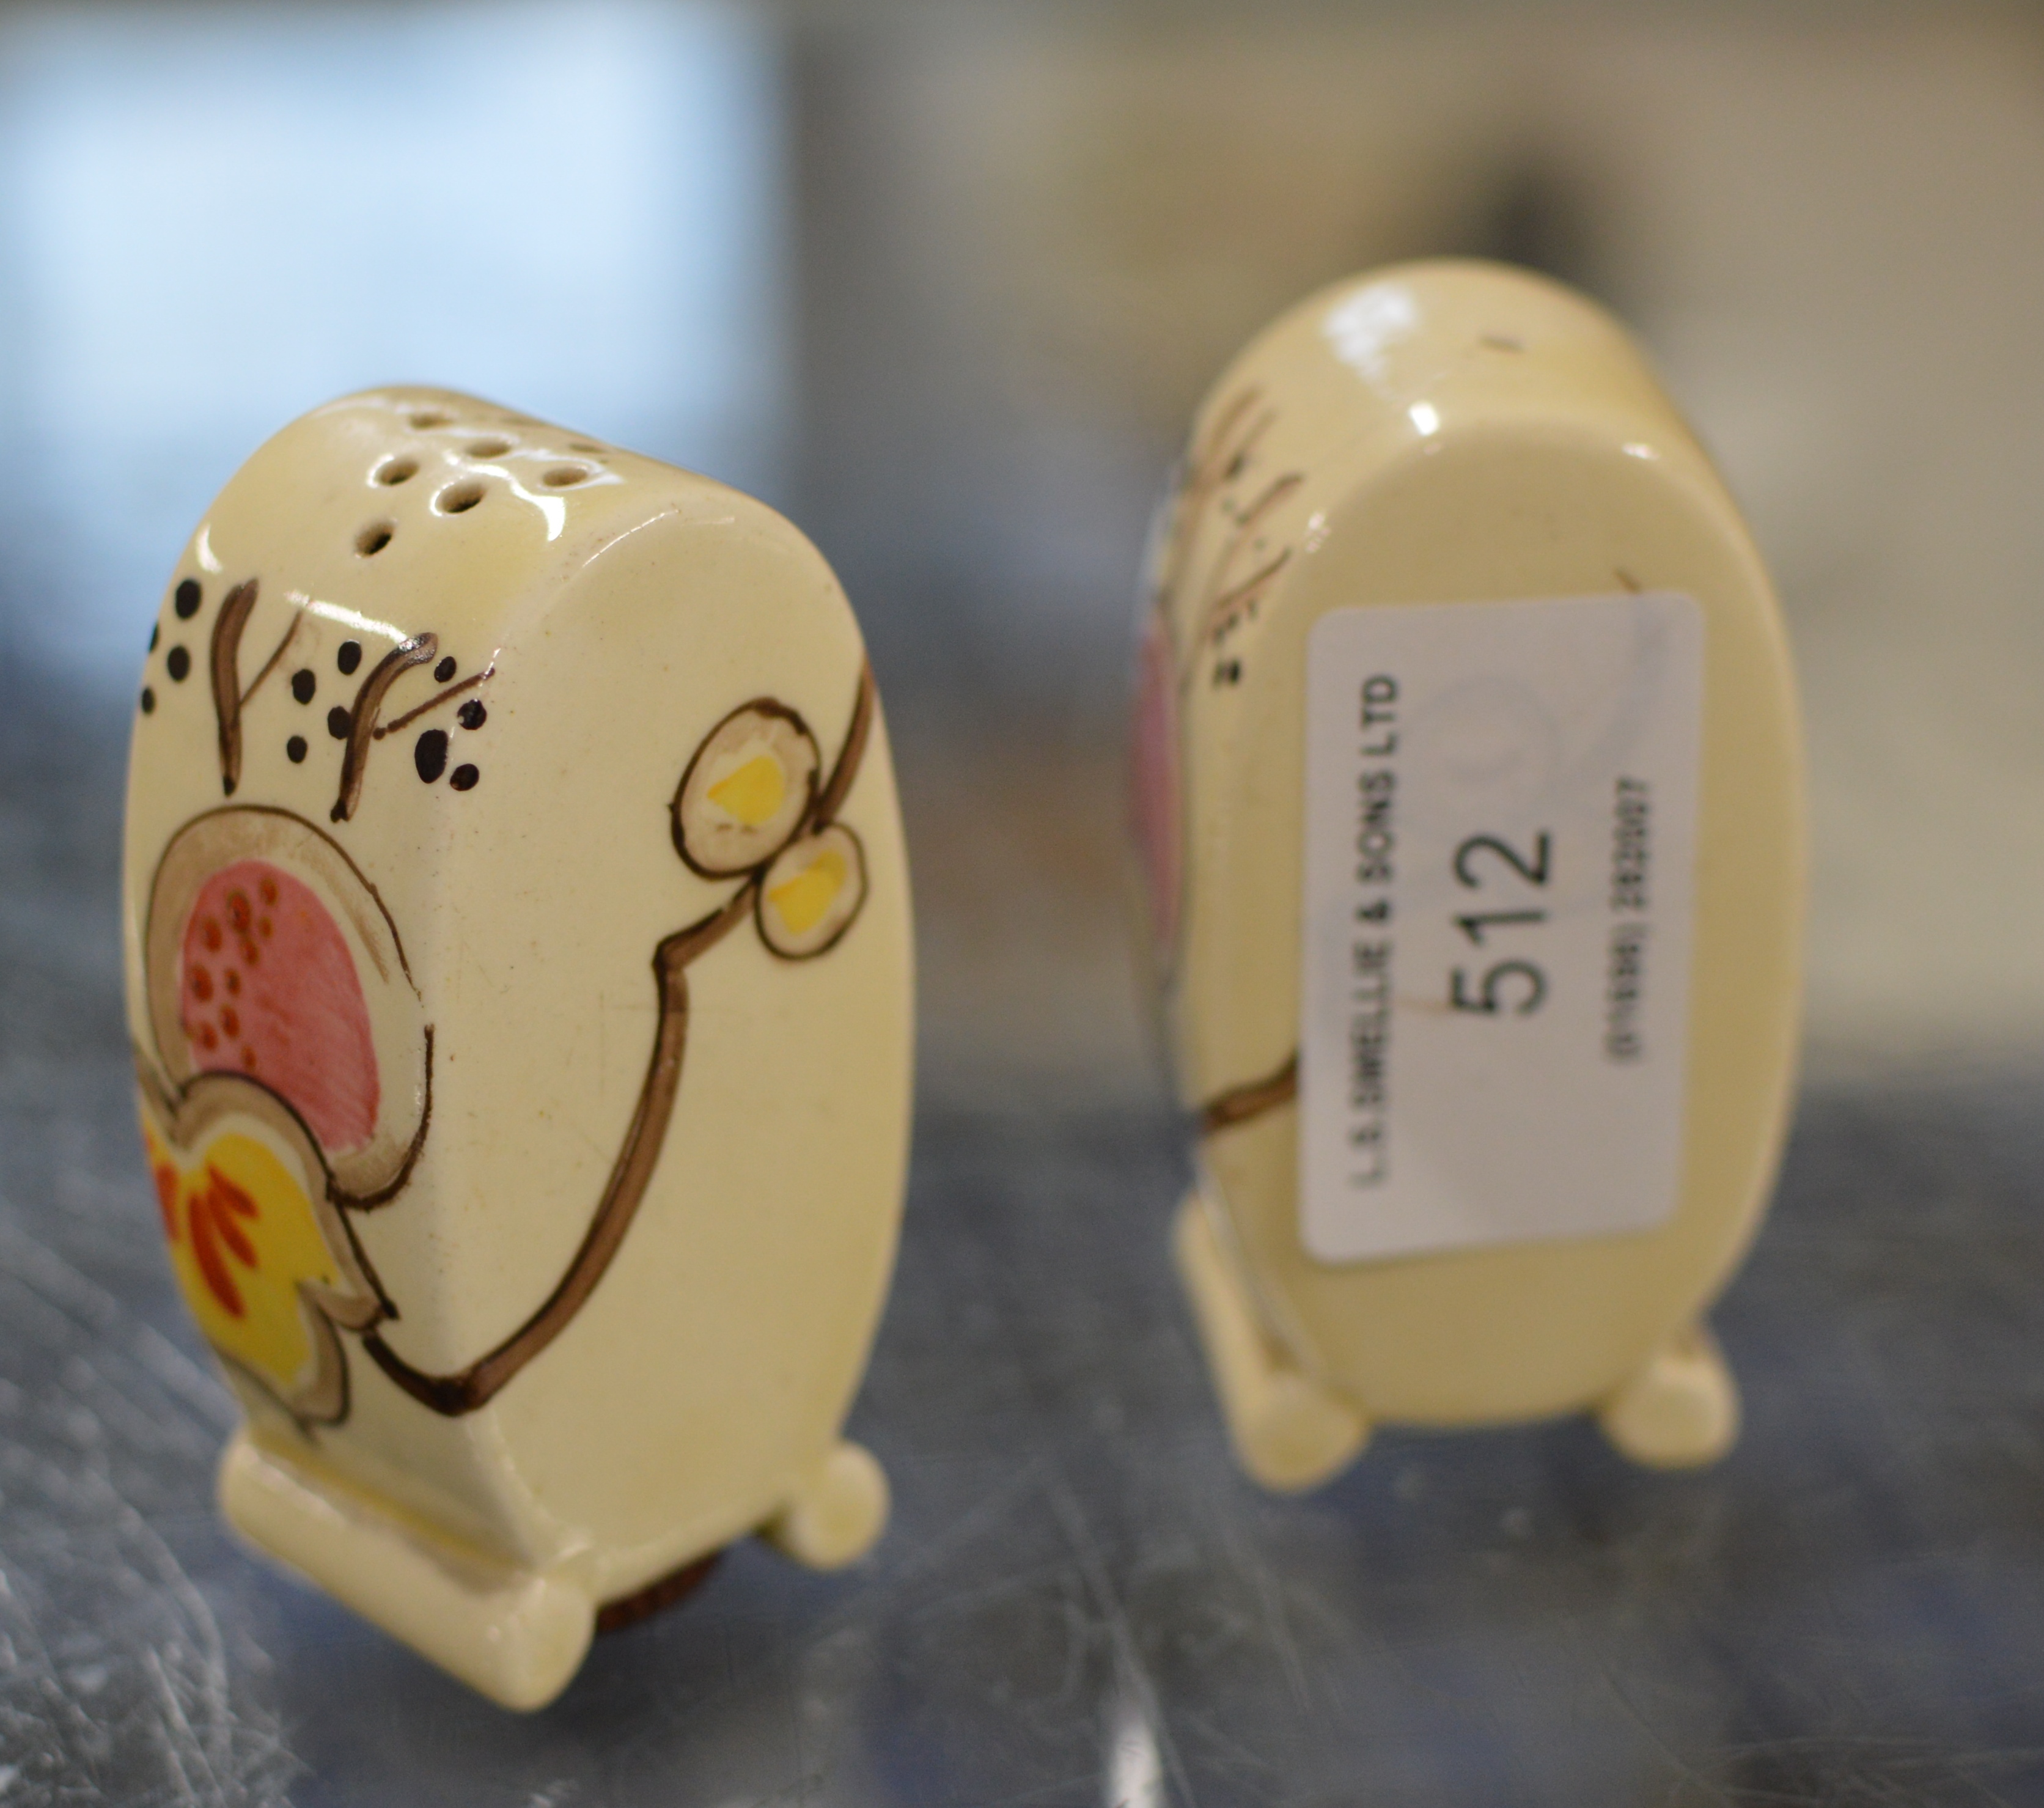 A PAIR OF ART DECO HAND PAINTED SALT & PEPPER CRUETS IN THE STYLE OF CLARICE CLIFF - Image 3 of 4